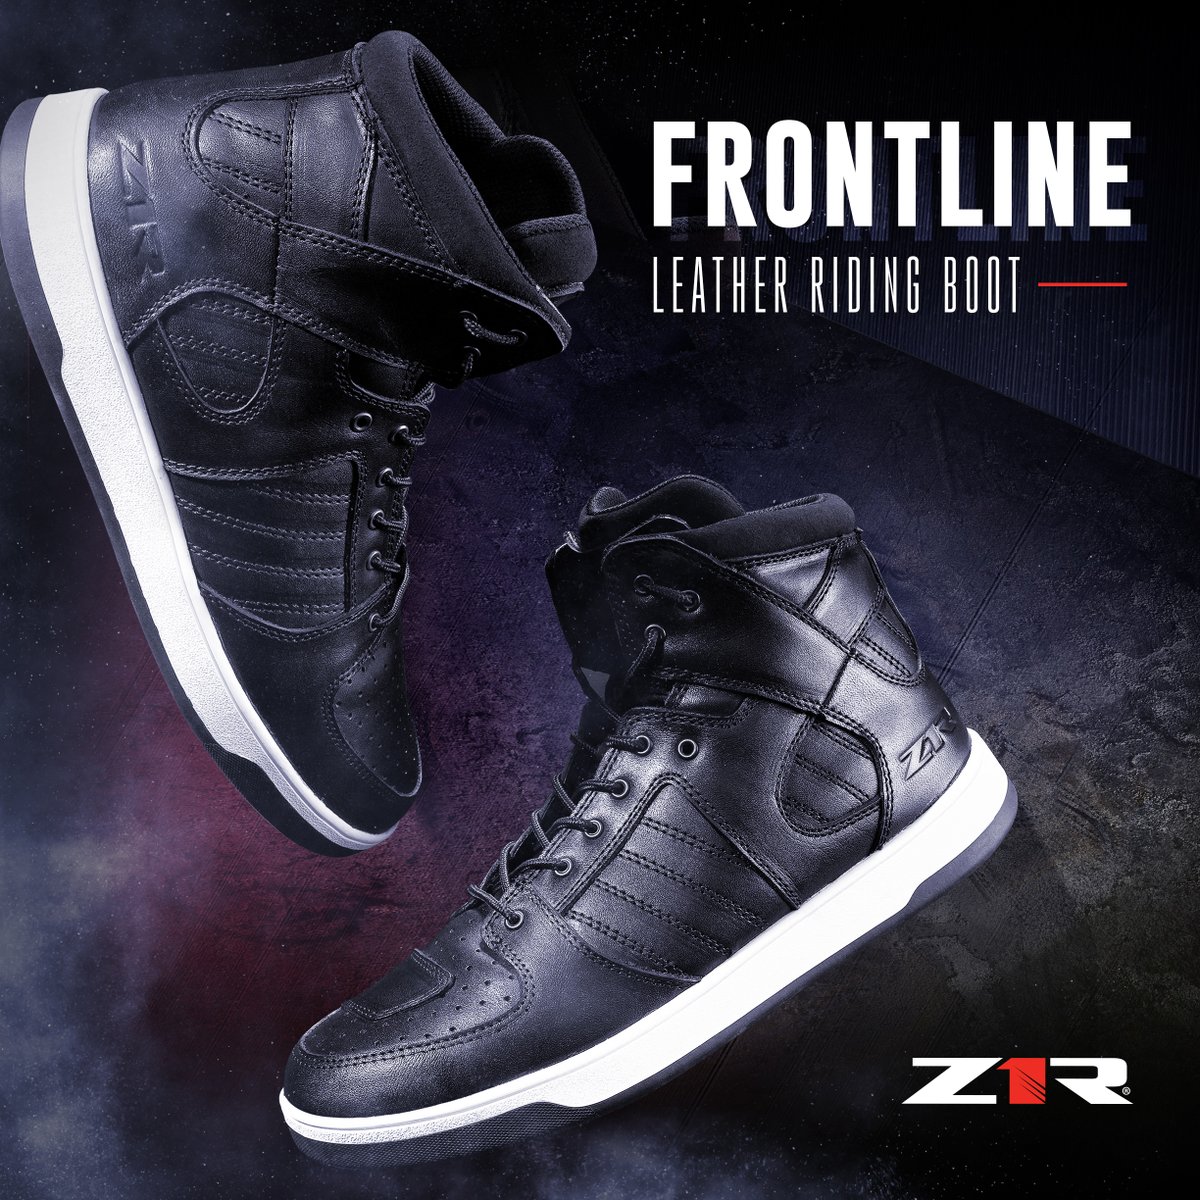 The all new Frontline Boot! Z1R.COM
_

#RideZ1R #motorcycleperformance #bikersofinstagram #ridemore #ridefree #bikersofinsta #twowheeltherapy #powersports #baggernation #criminaldyna #clubstyledyna #tattoos #inkedlife #dragspecialties #wesupportthesport